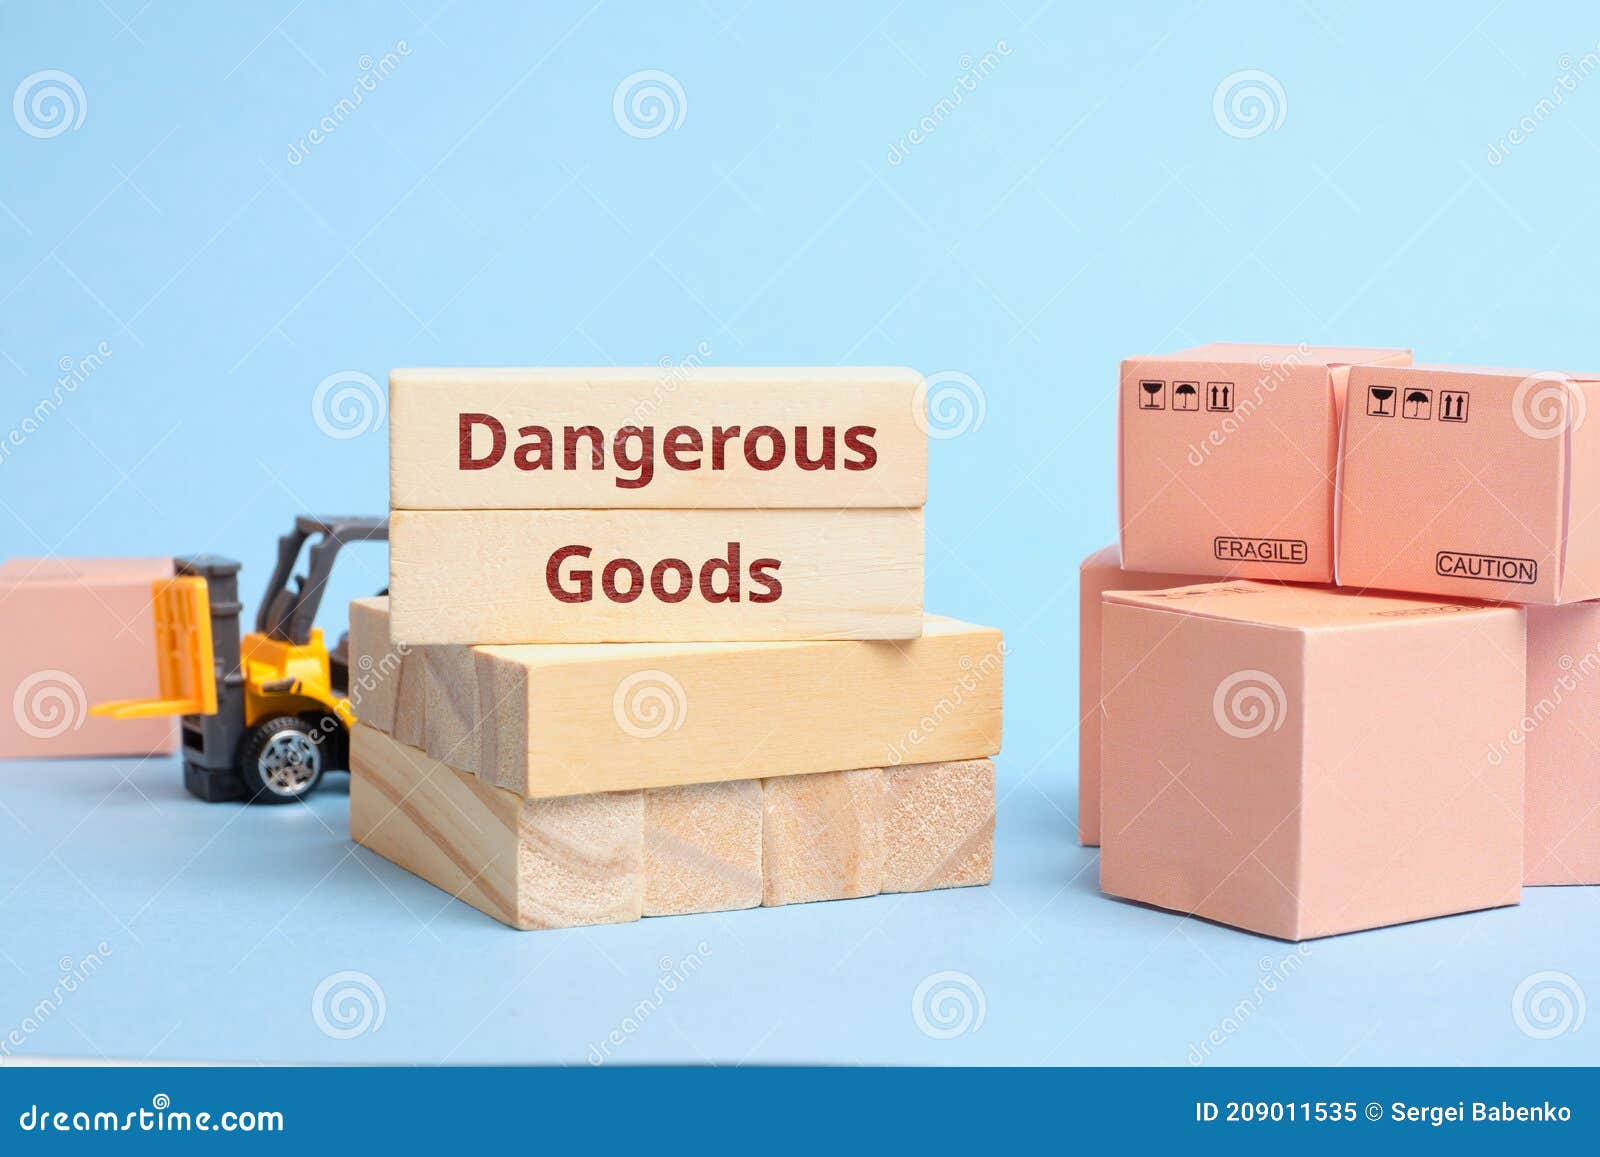 courier industry term dangerous goods. cargo requiring special packaging and transportation rules